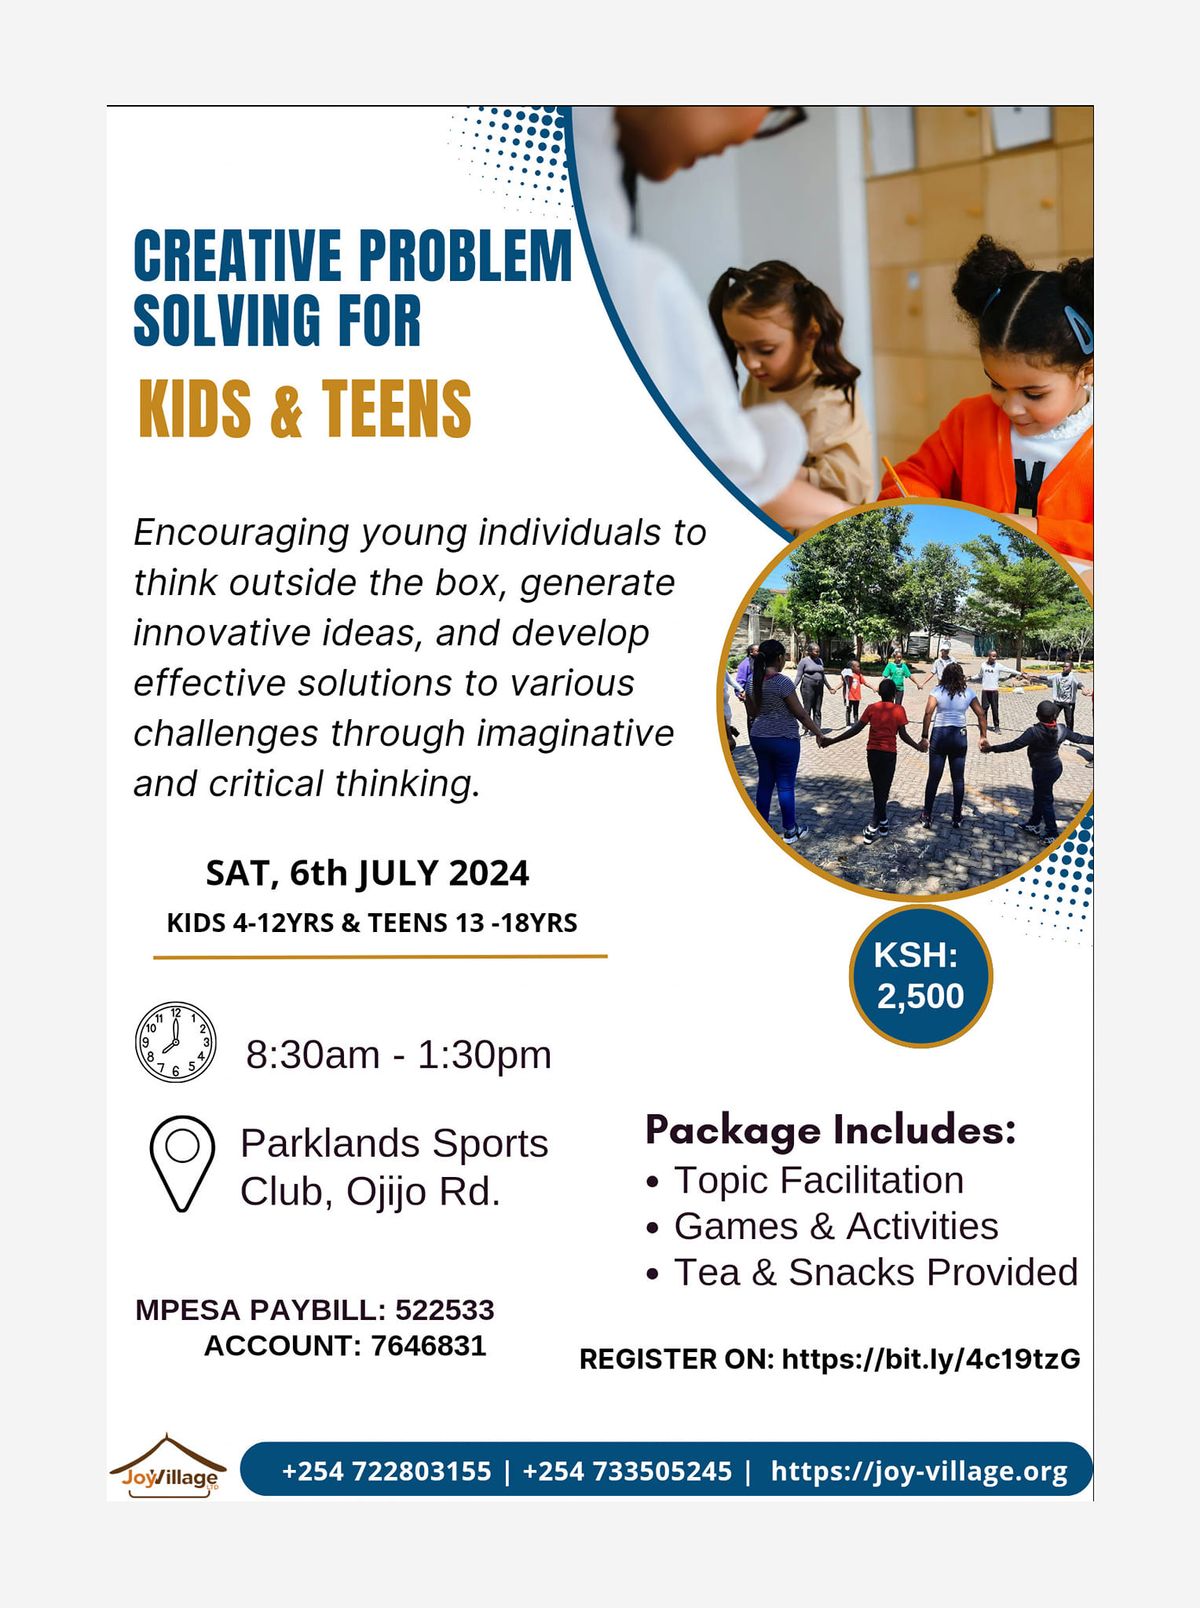 Creative Problem Solving for Kids & Teens